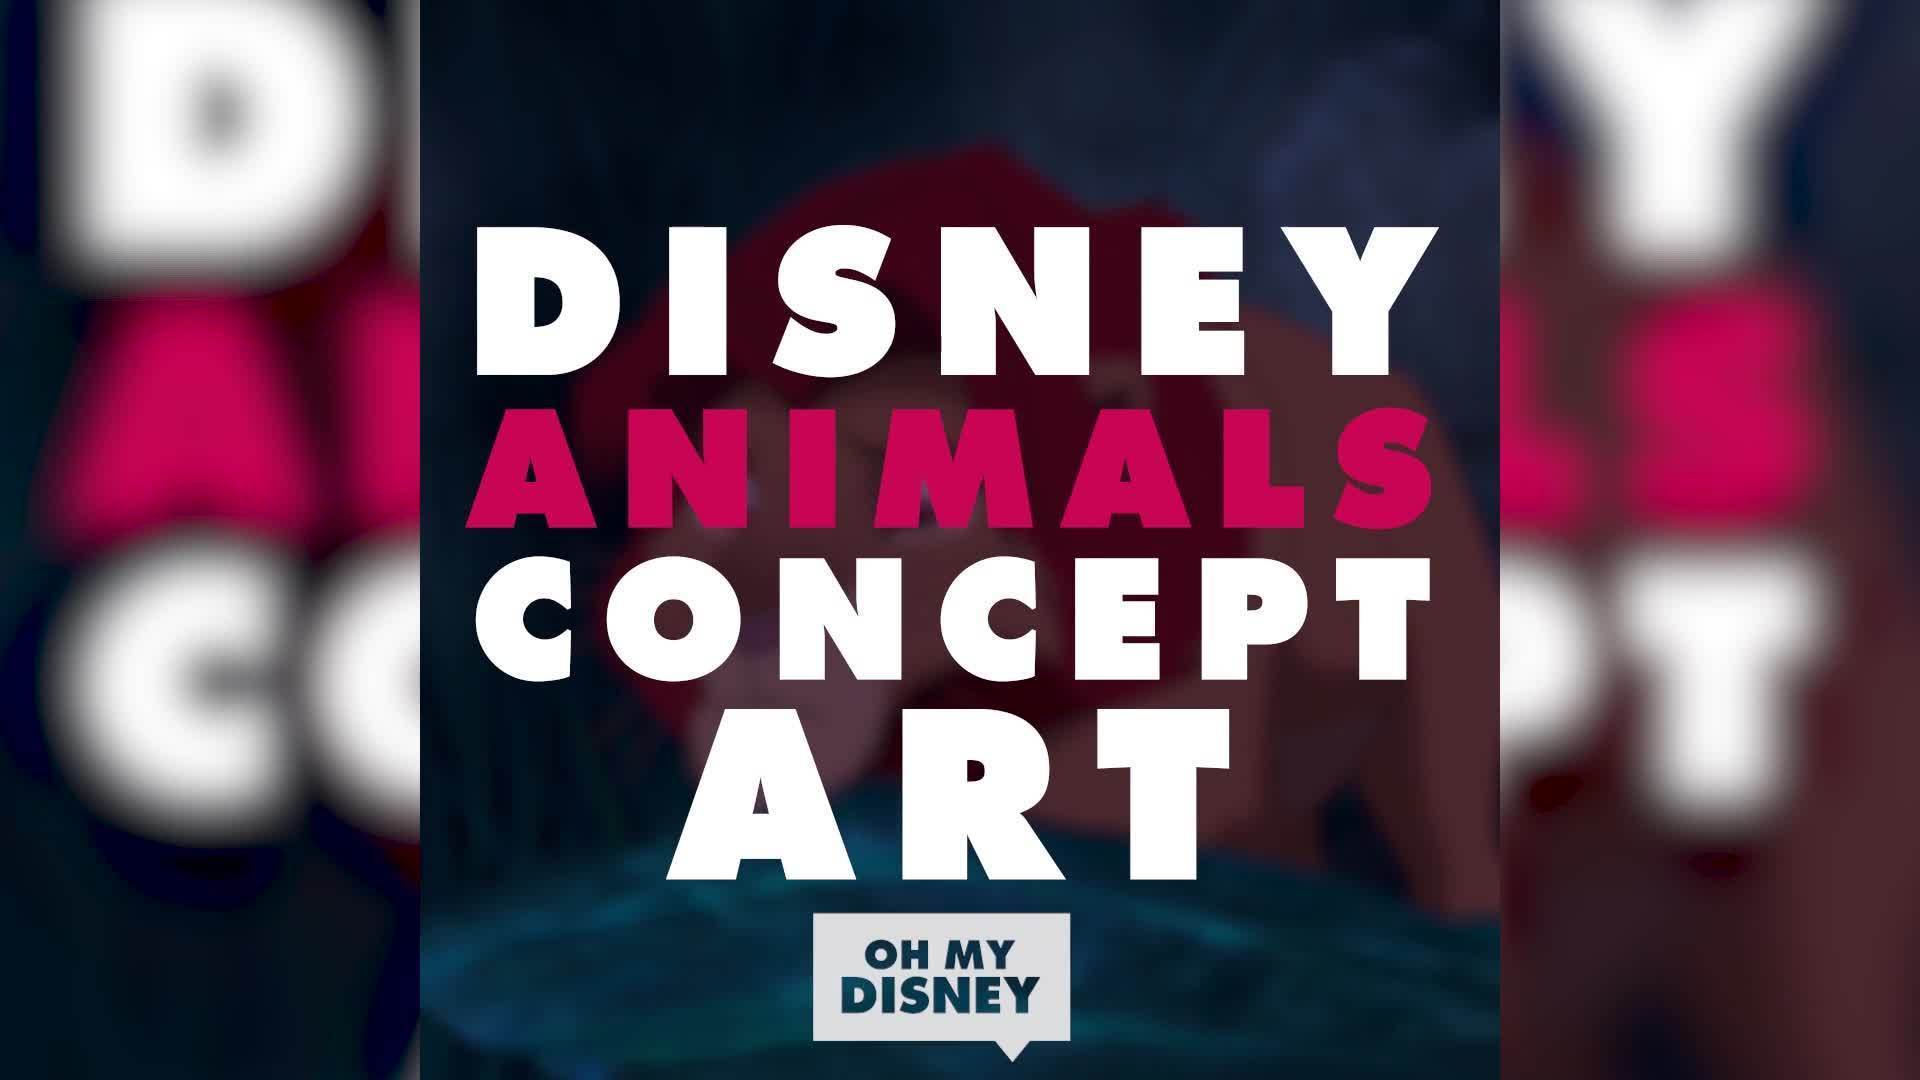 Disney Animals Concept Art | Exclusives by Oh My Disney